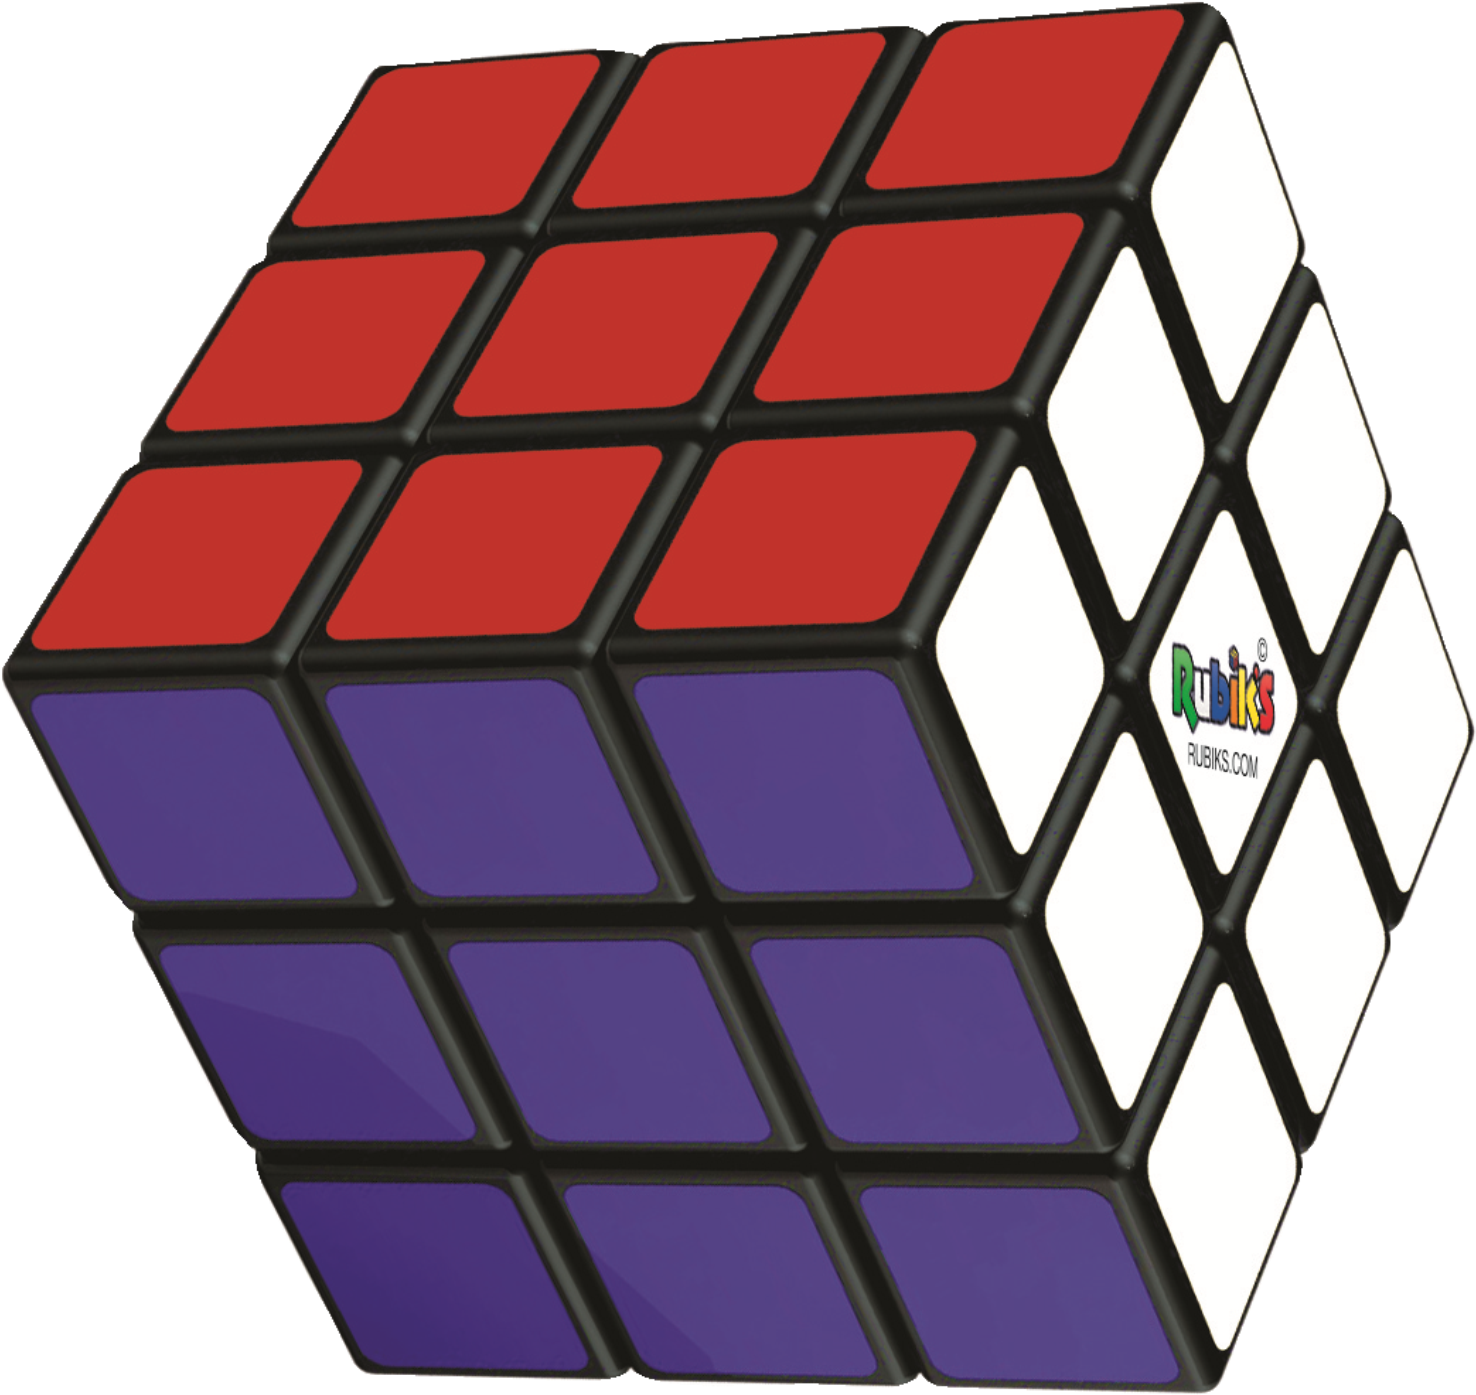 Rubiks Cube Partially Solved